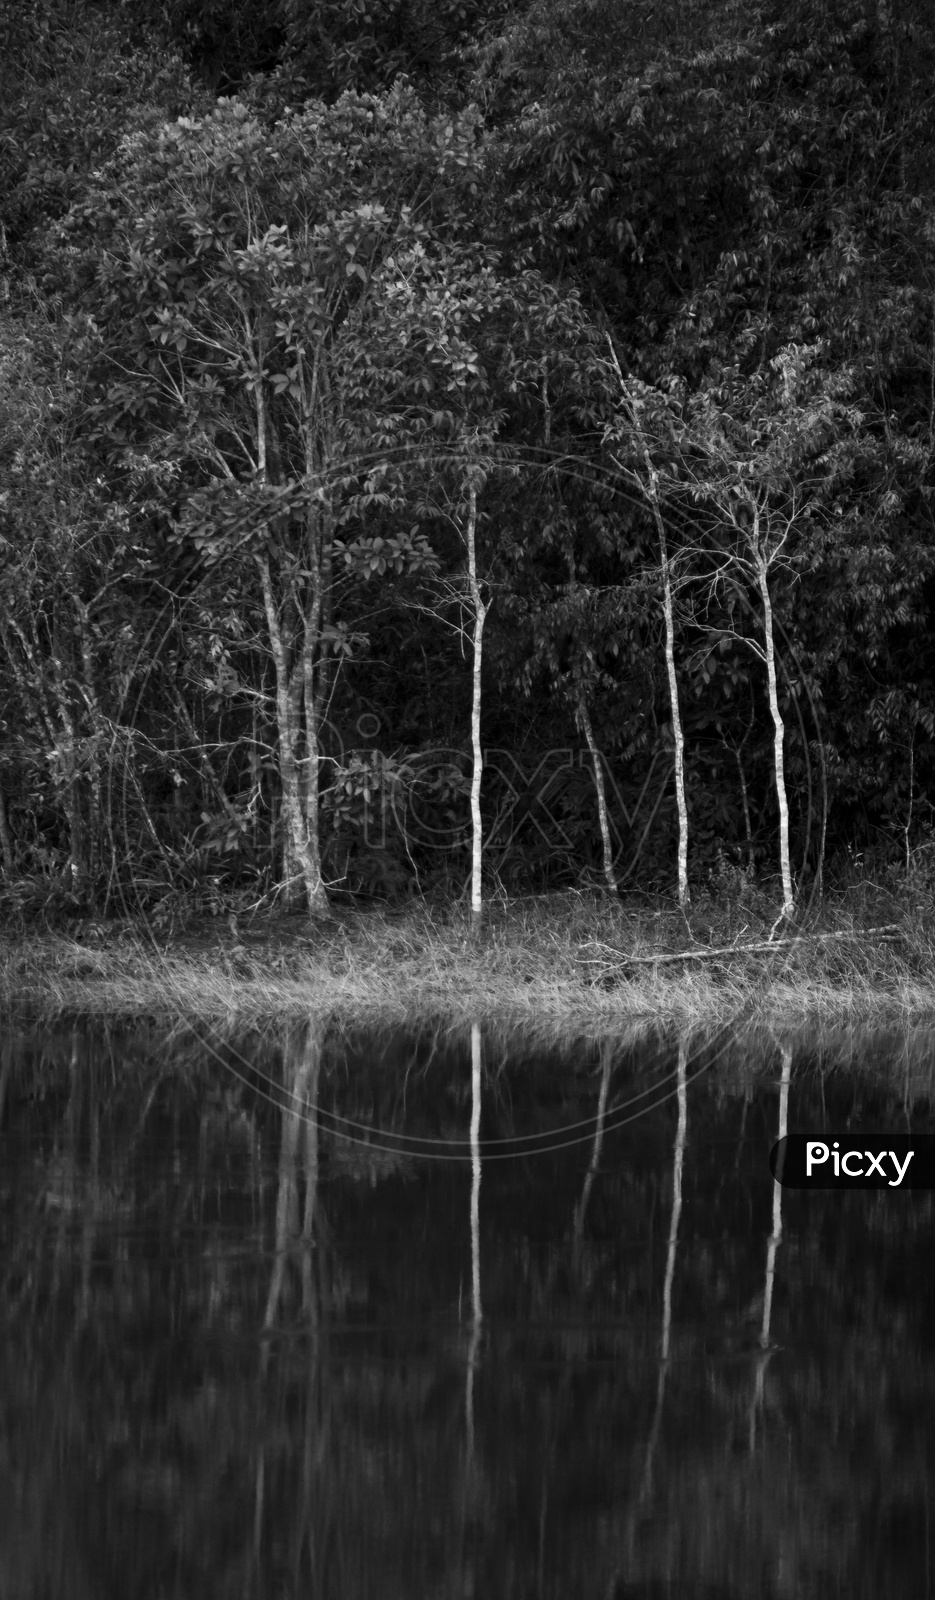 Tropical Rain Forest With Water Lake And Refection Of Trees On Water Surface  With B&W  Filter